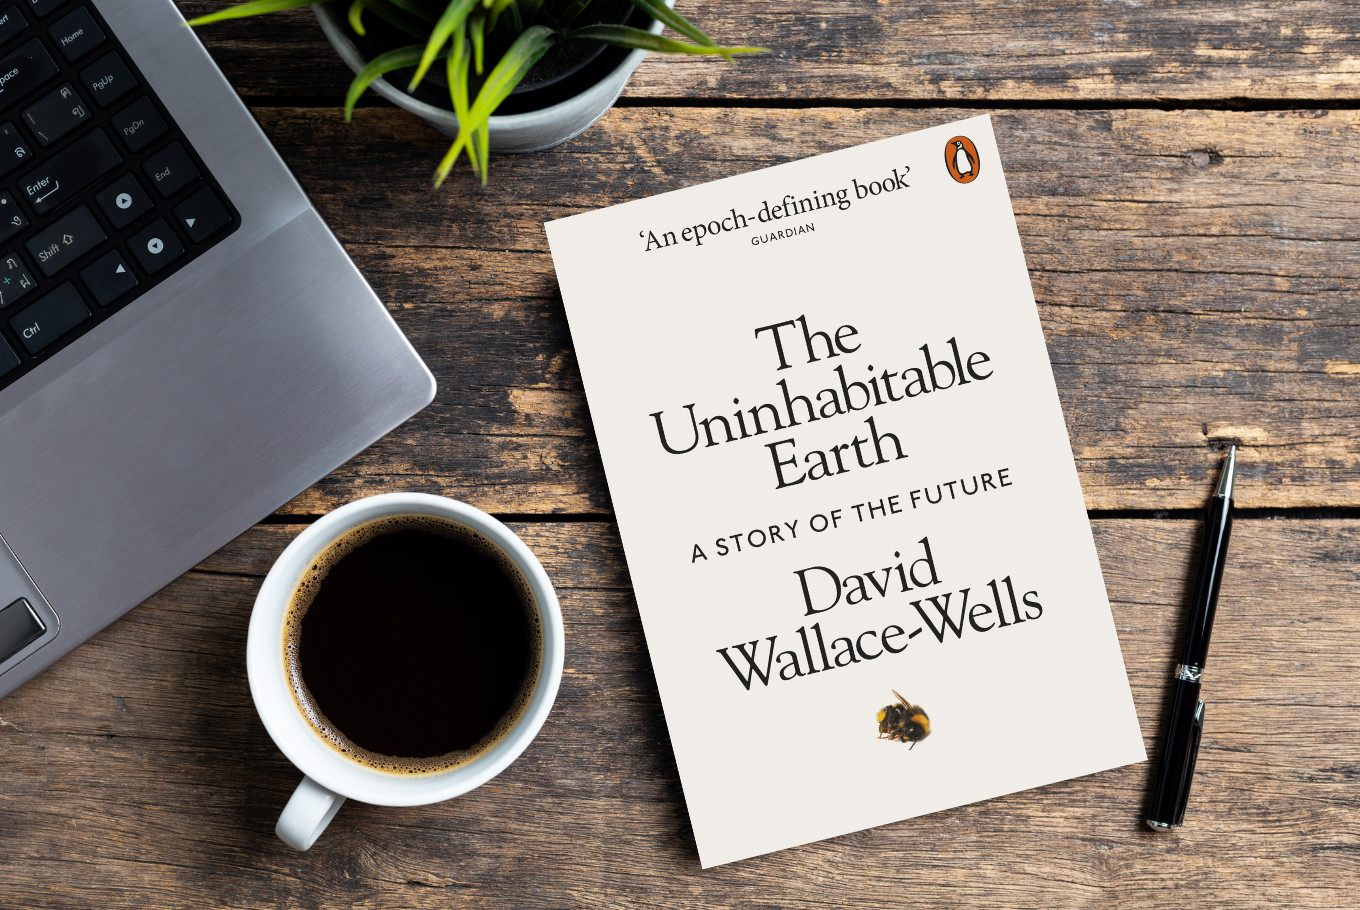 Featured image for “The uninhabitable earth: A story of the future”